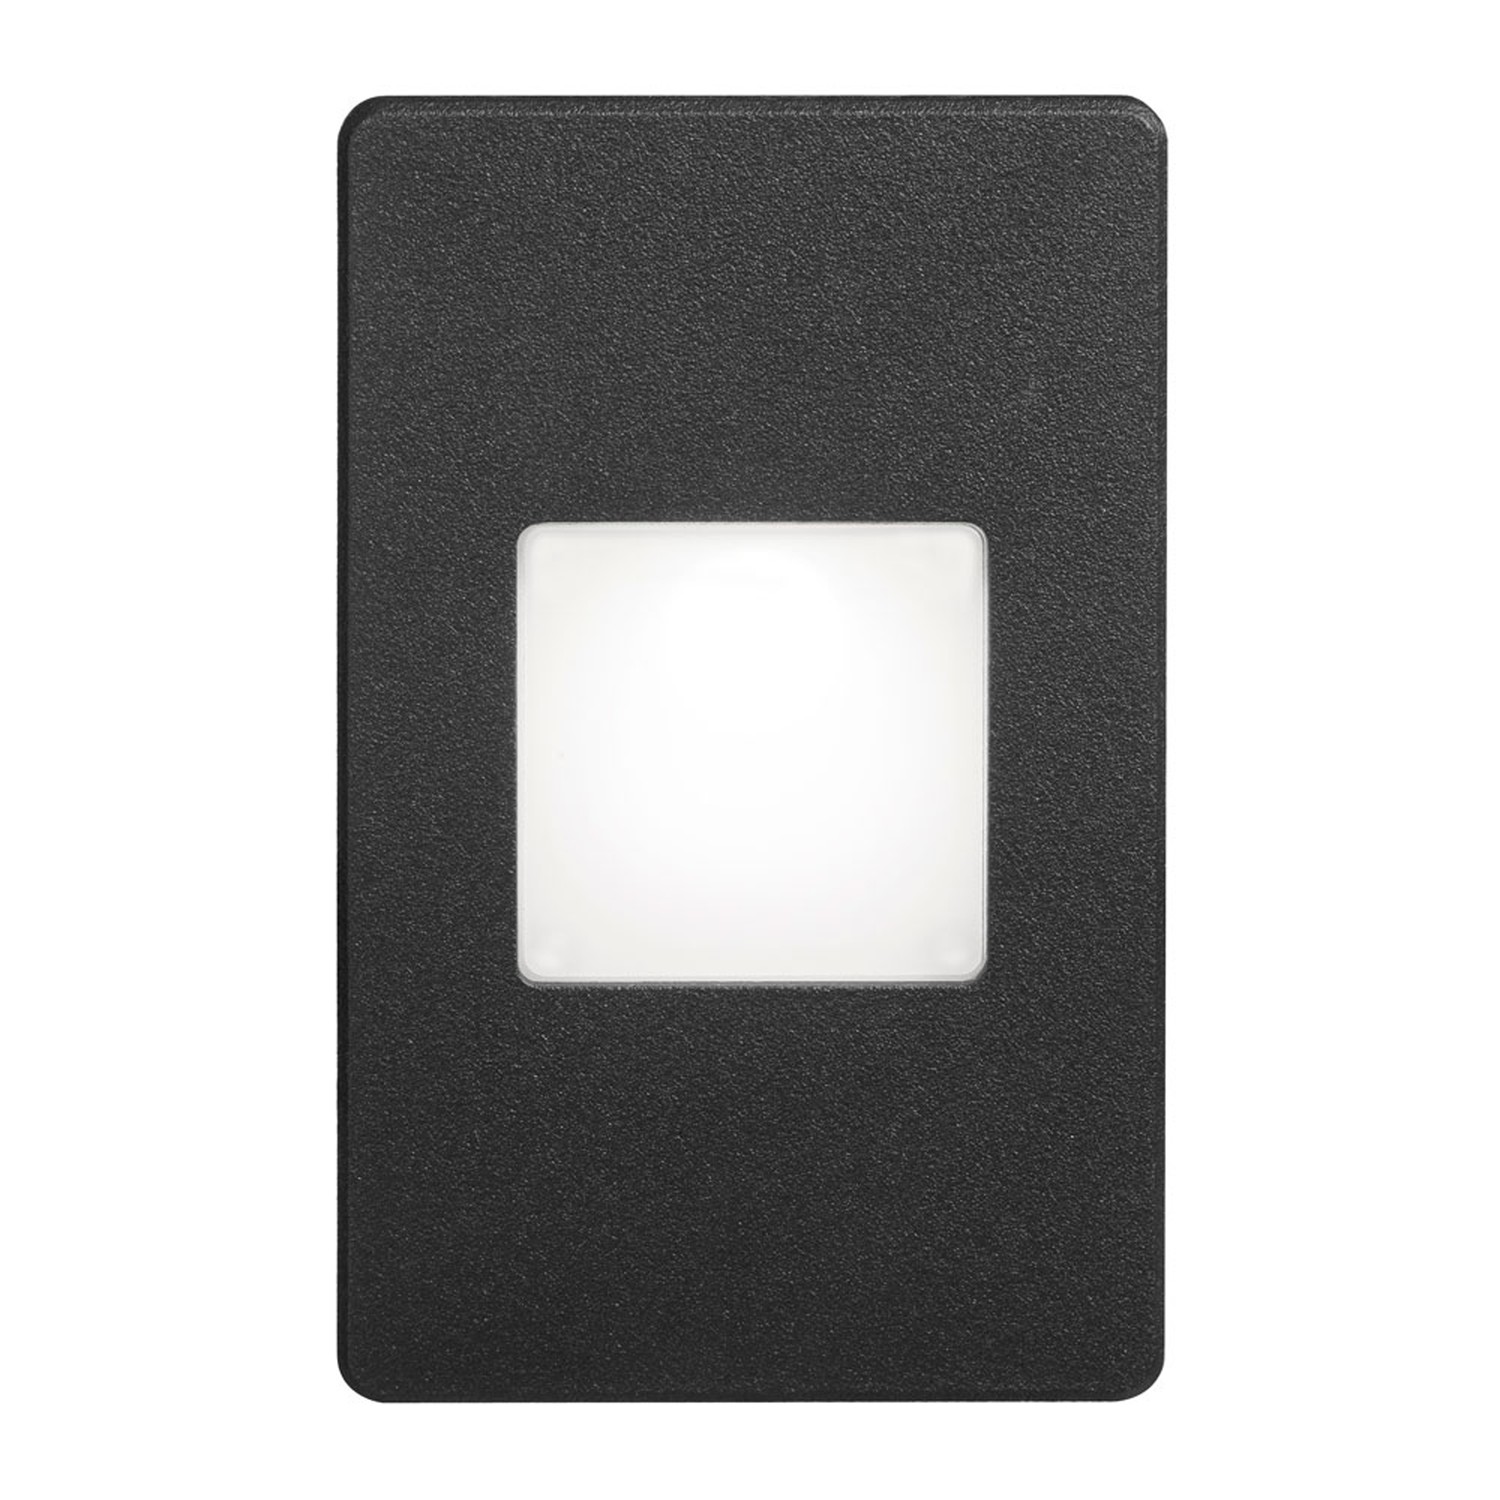 120VAC input, L125mmxW78mmxH37mm, 2700K, 3.3W IP65, Black Wall LED Light with White Lens